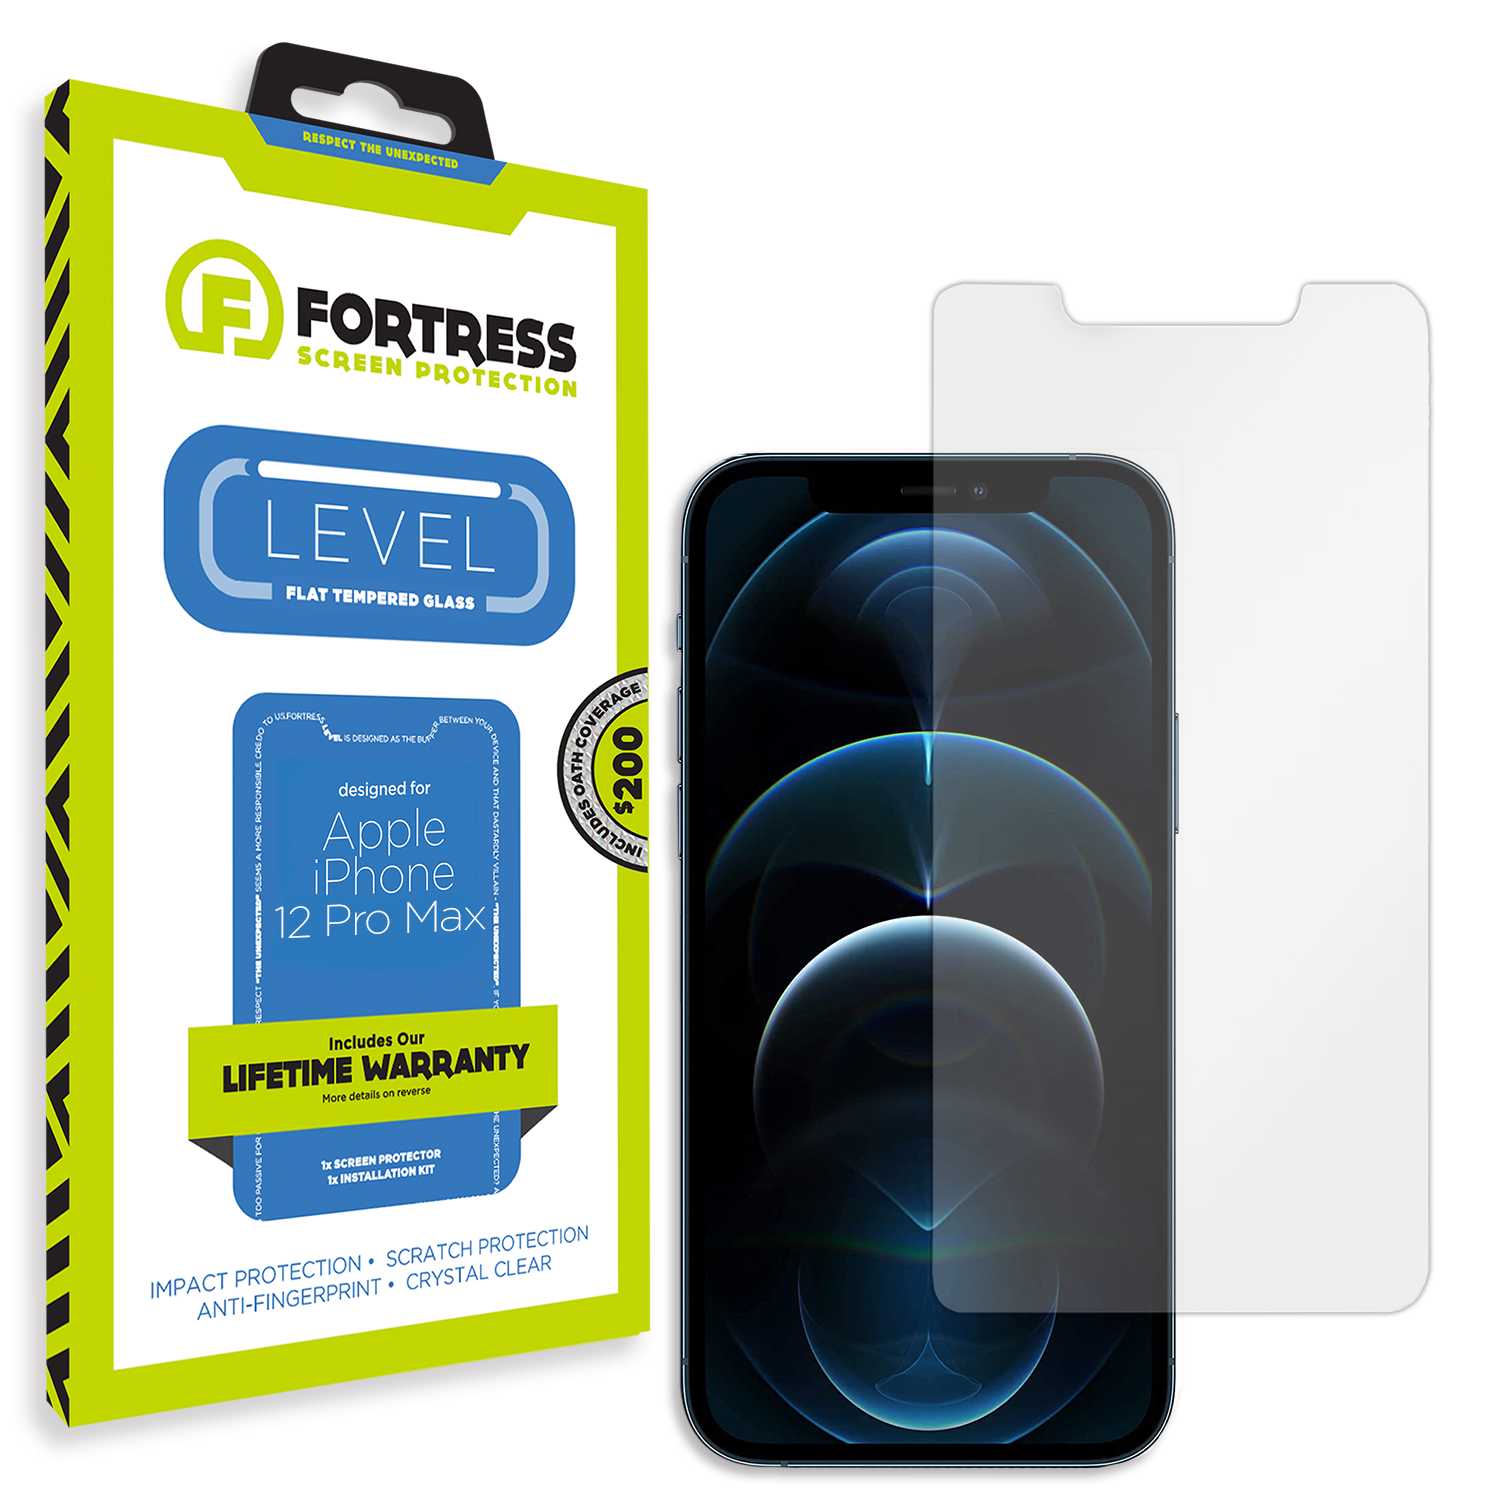 Fortress iPhone 12 Pro Max Screen Protector $200Coverage Scooch Screen Protector